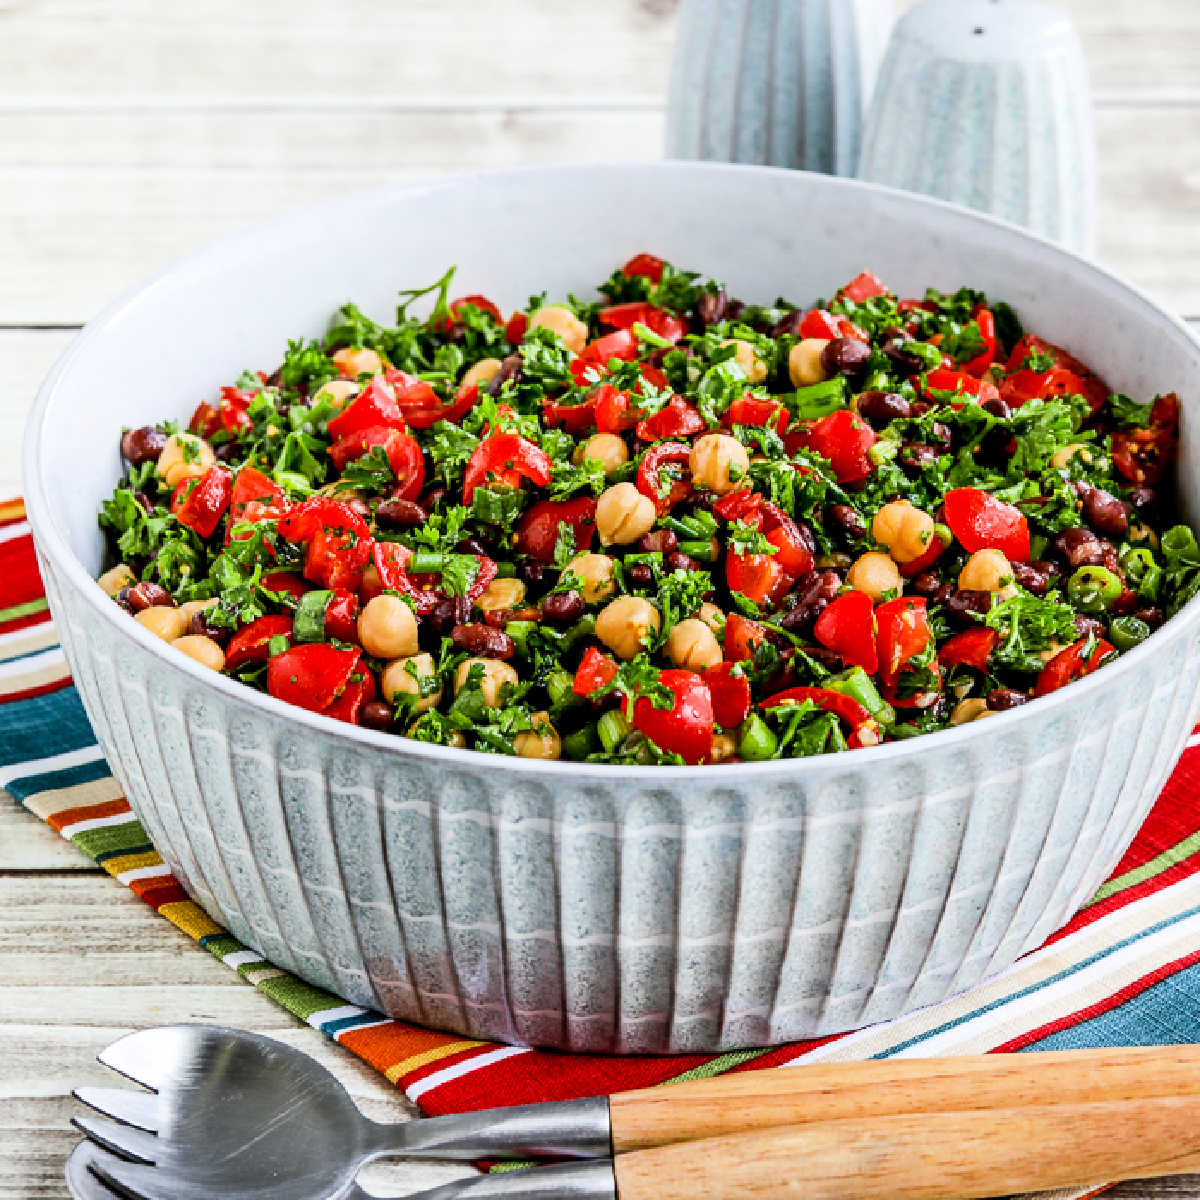 Middle Eastern Bean Salad shown in serving bowl.